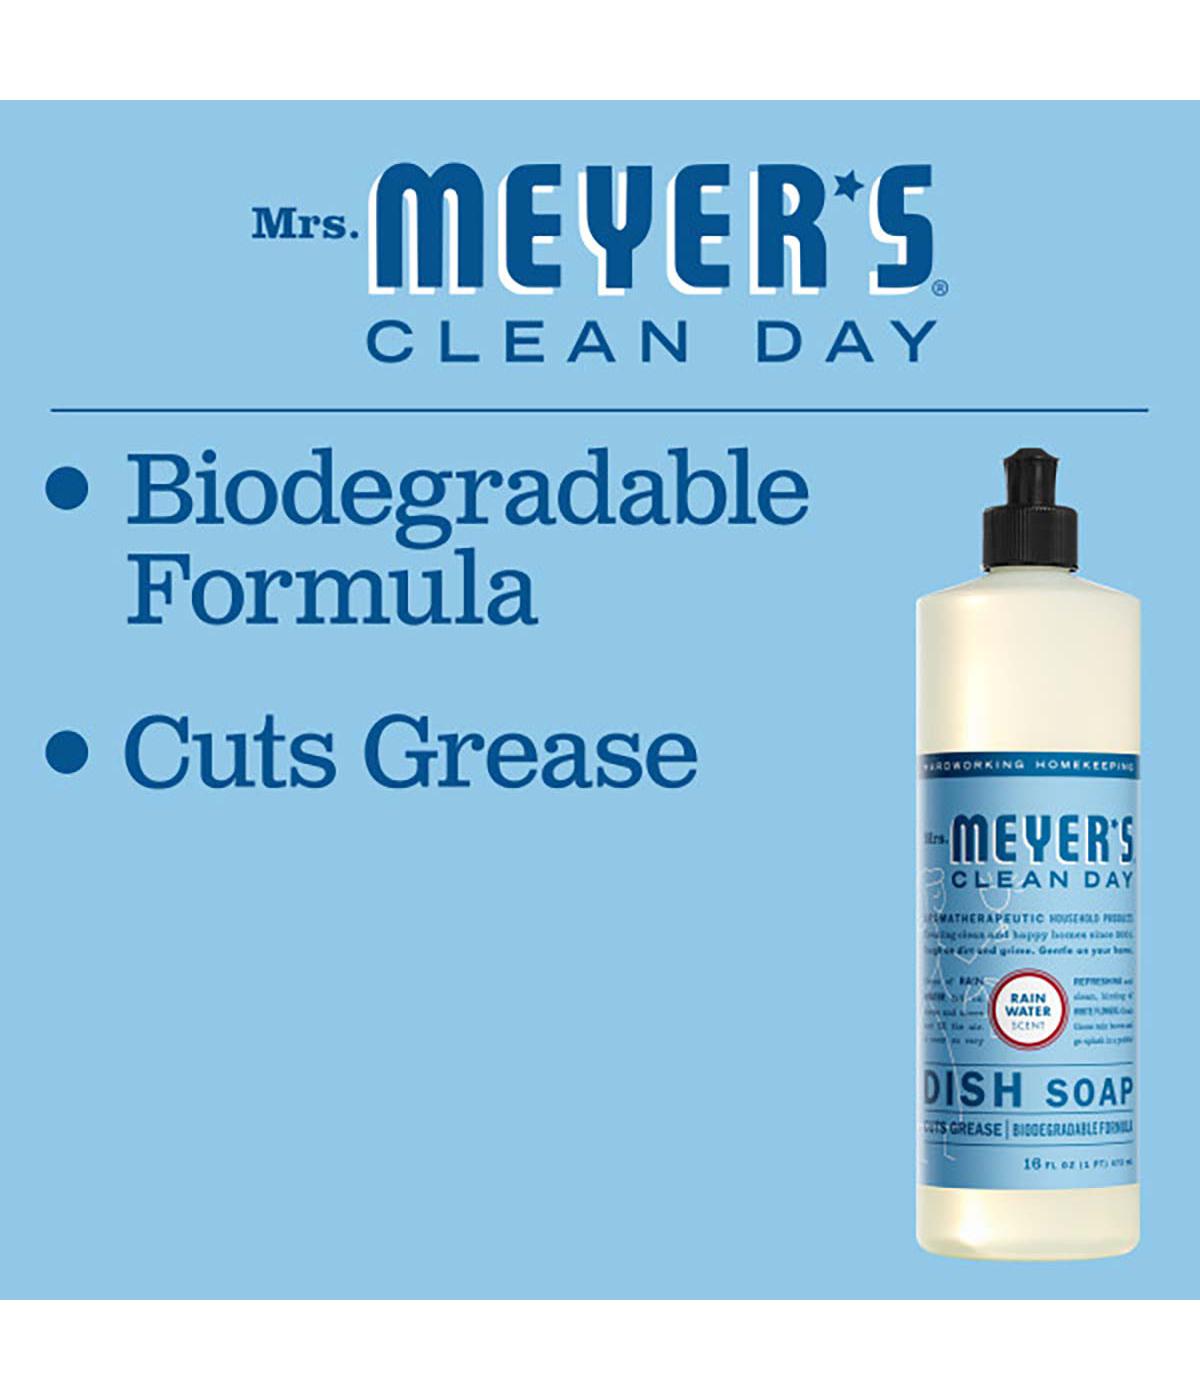 Mrs. Meyer's Clean Day Rainwater Dish Soap; image 5 of 6